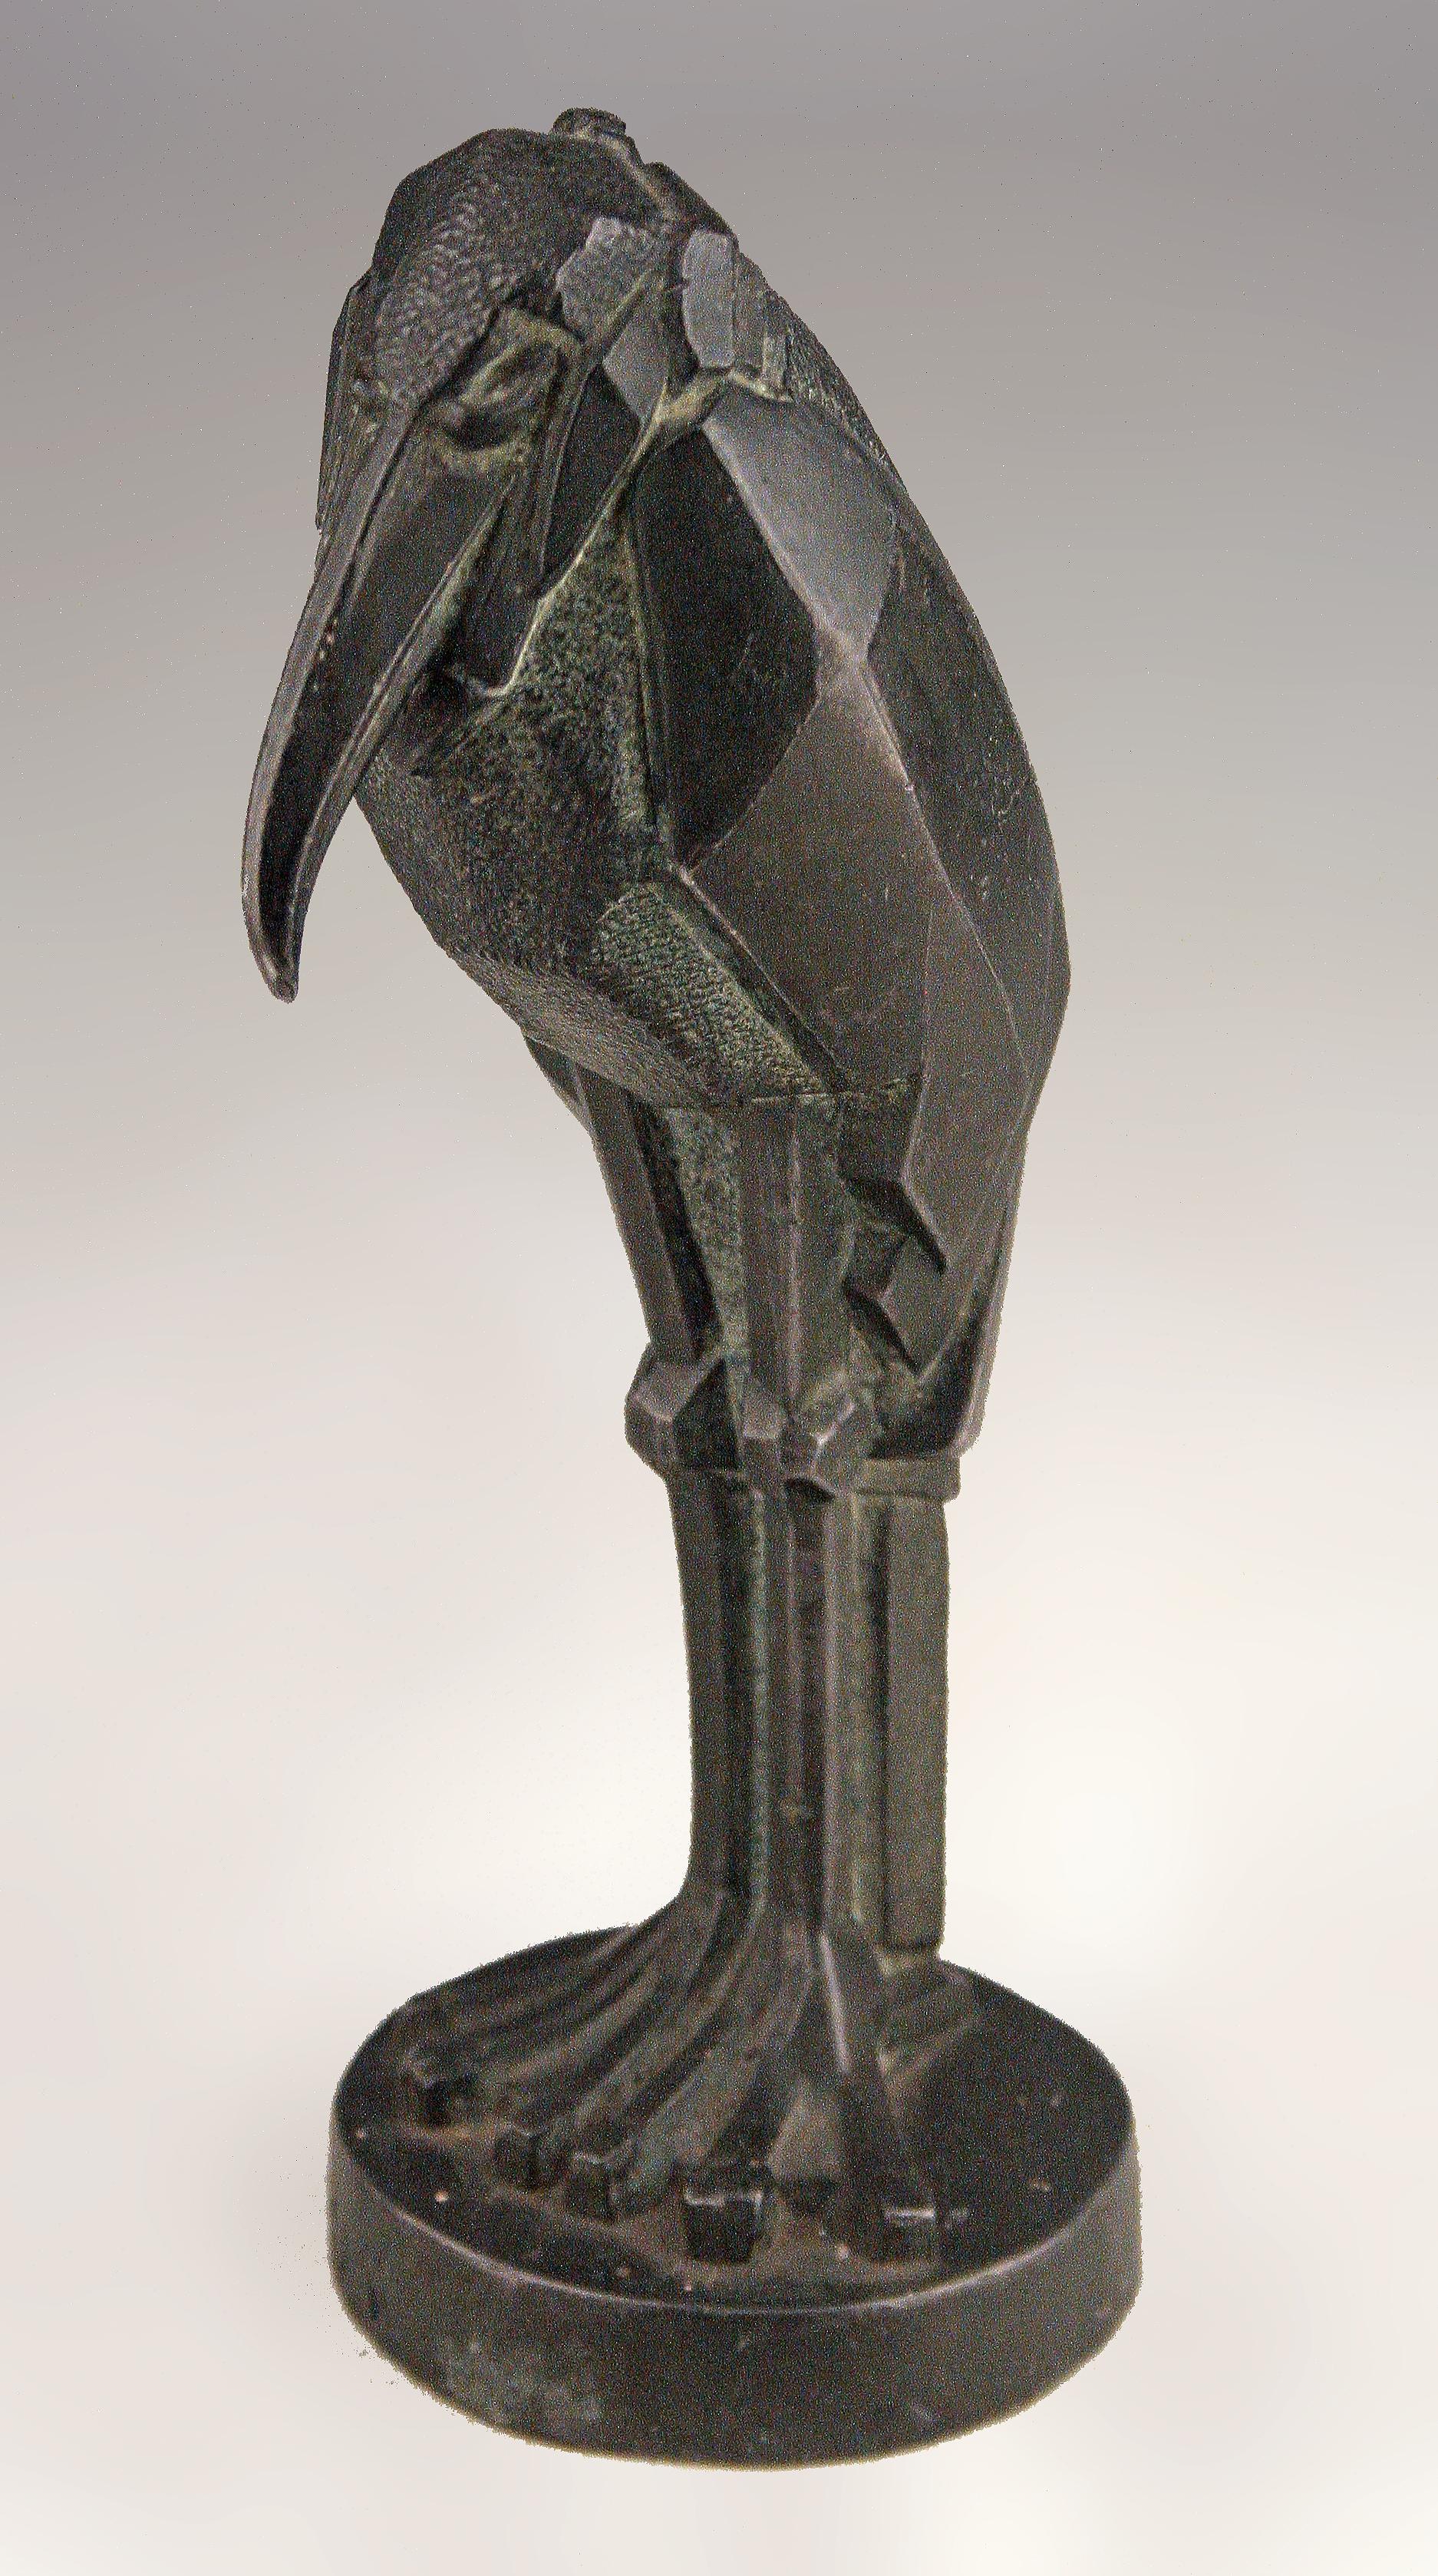 Art Déco french patinated bronze sculpture of an standing stork by animalier author Charles Artus

By: Charles Artus
Material: bronze, metal, copper
Technique: cast, patinated, molded, metalwork
Dimensions: 3.5 in x 2.5 in x 6.5 in
Date: early 20th